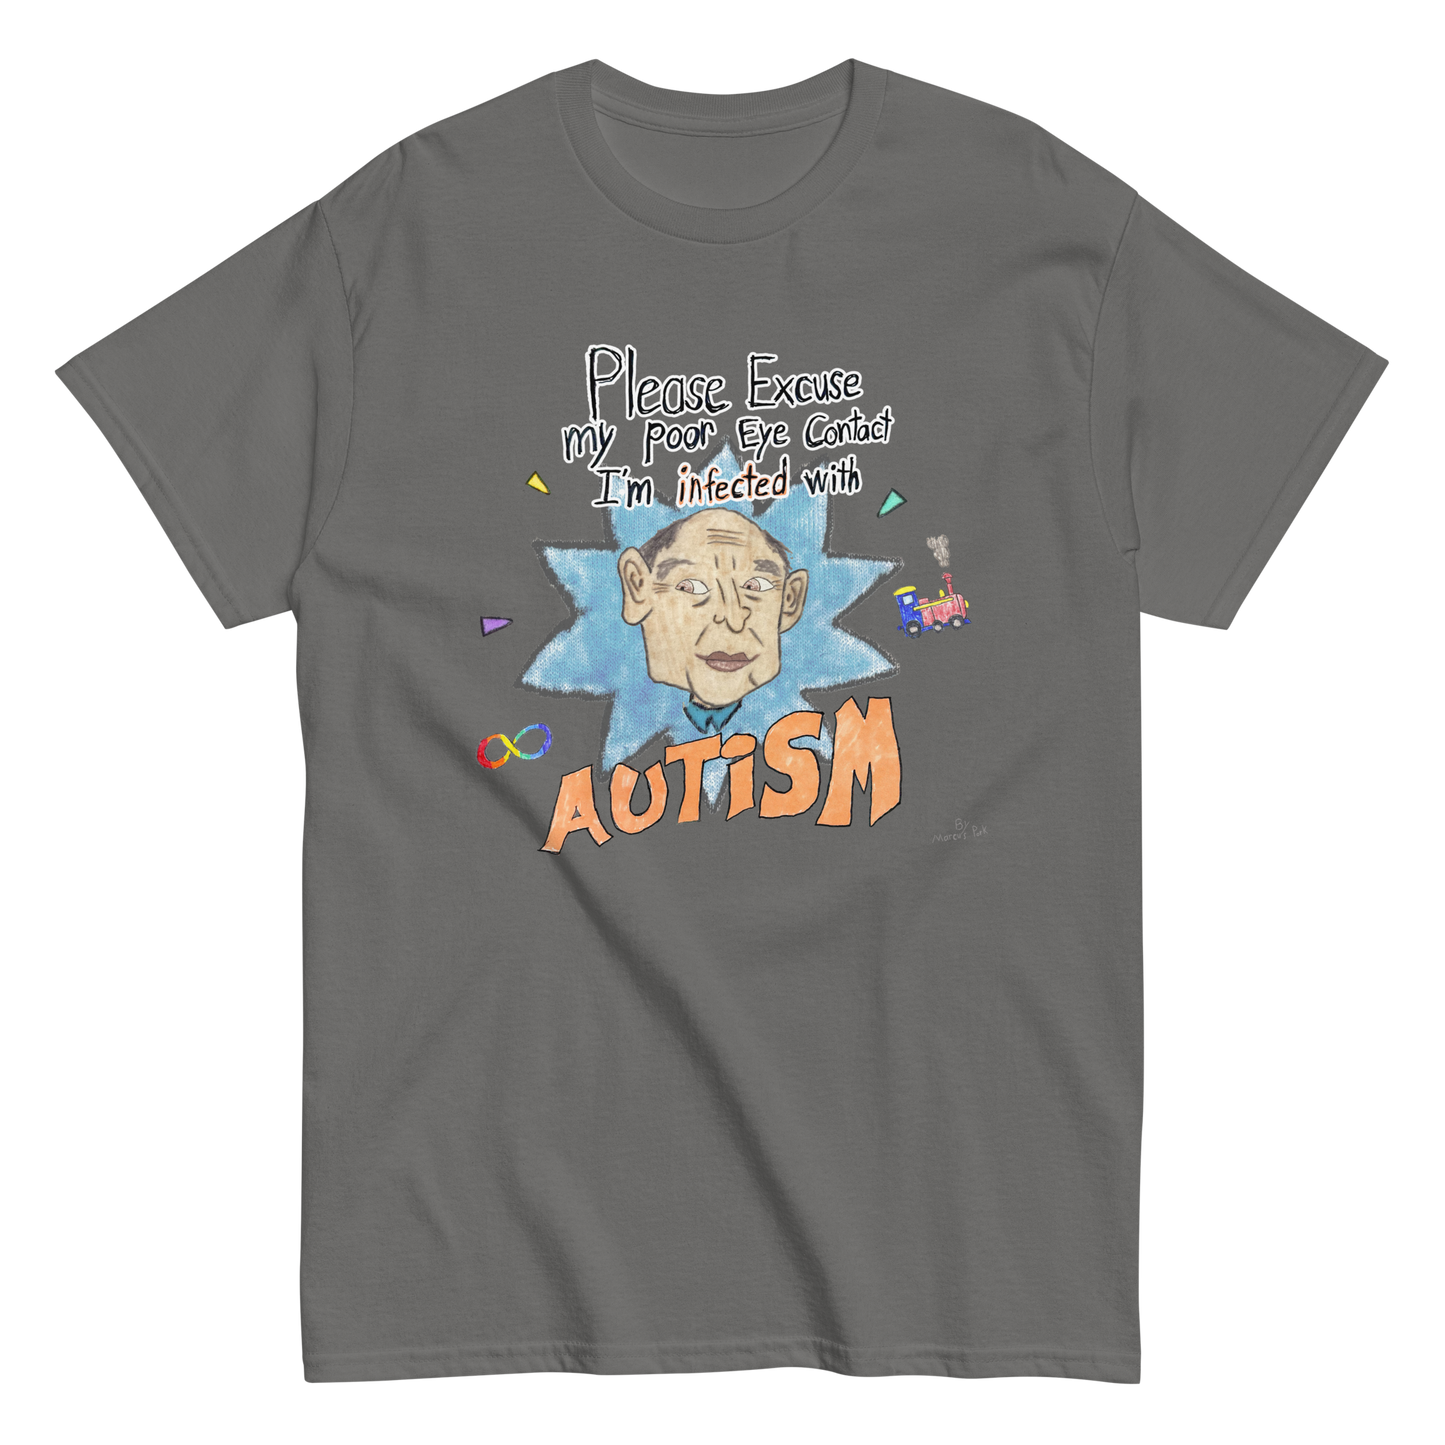 Infected with Autism T-Shirt